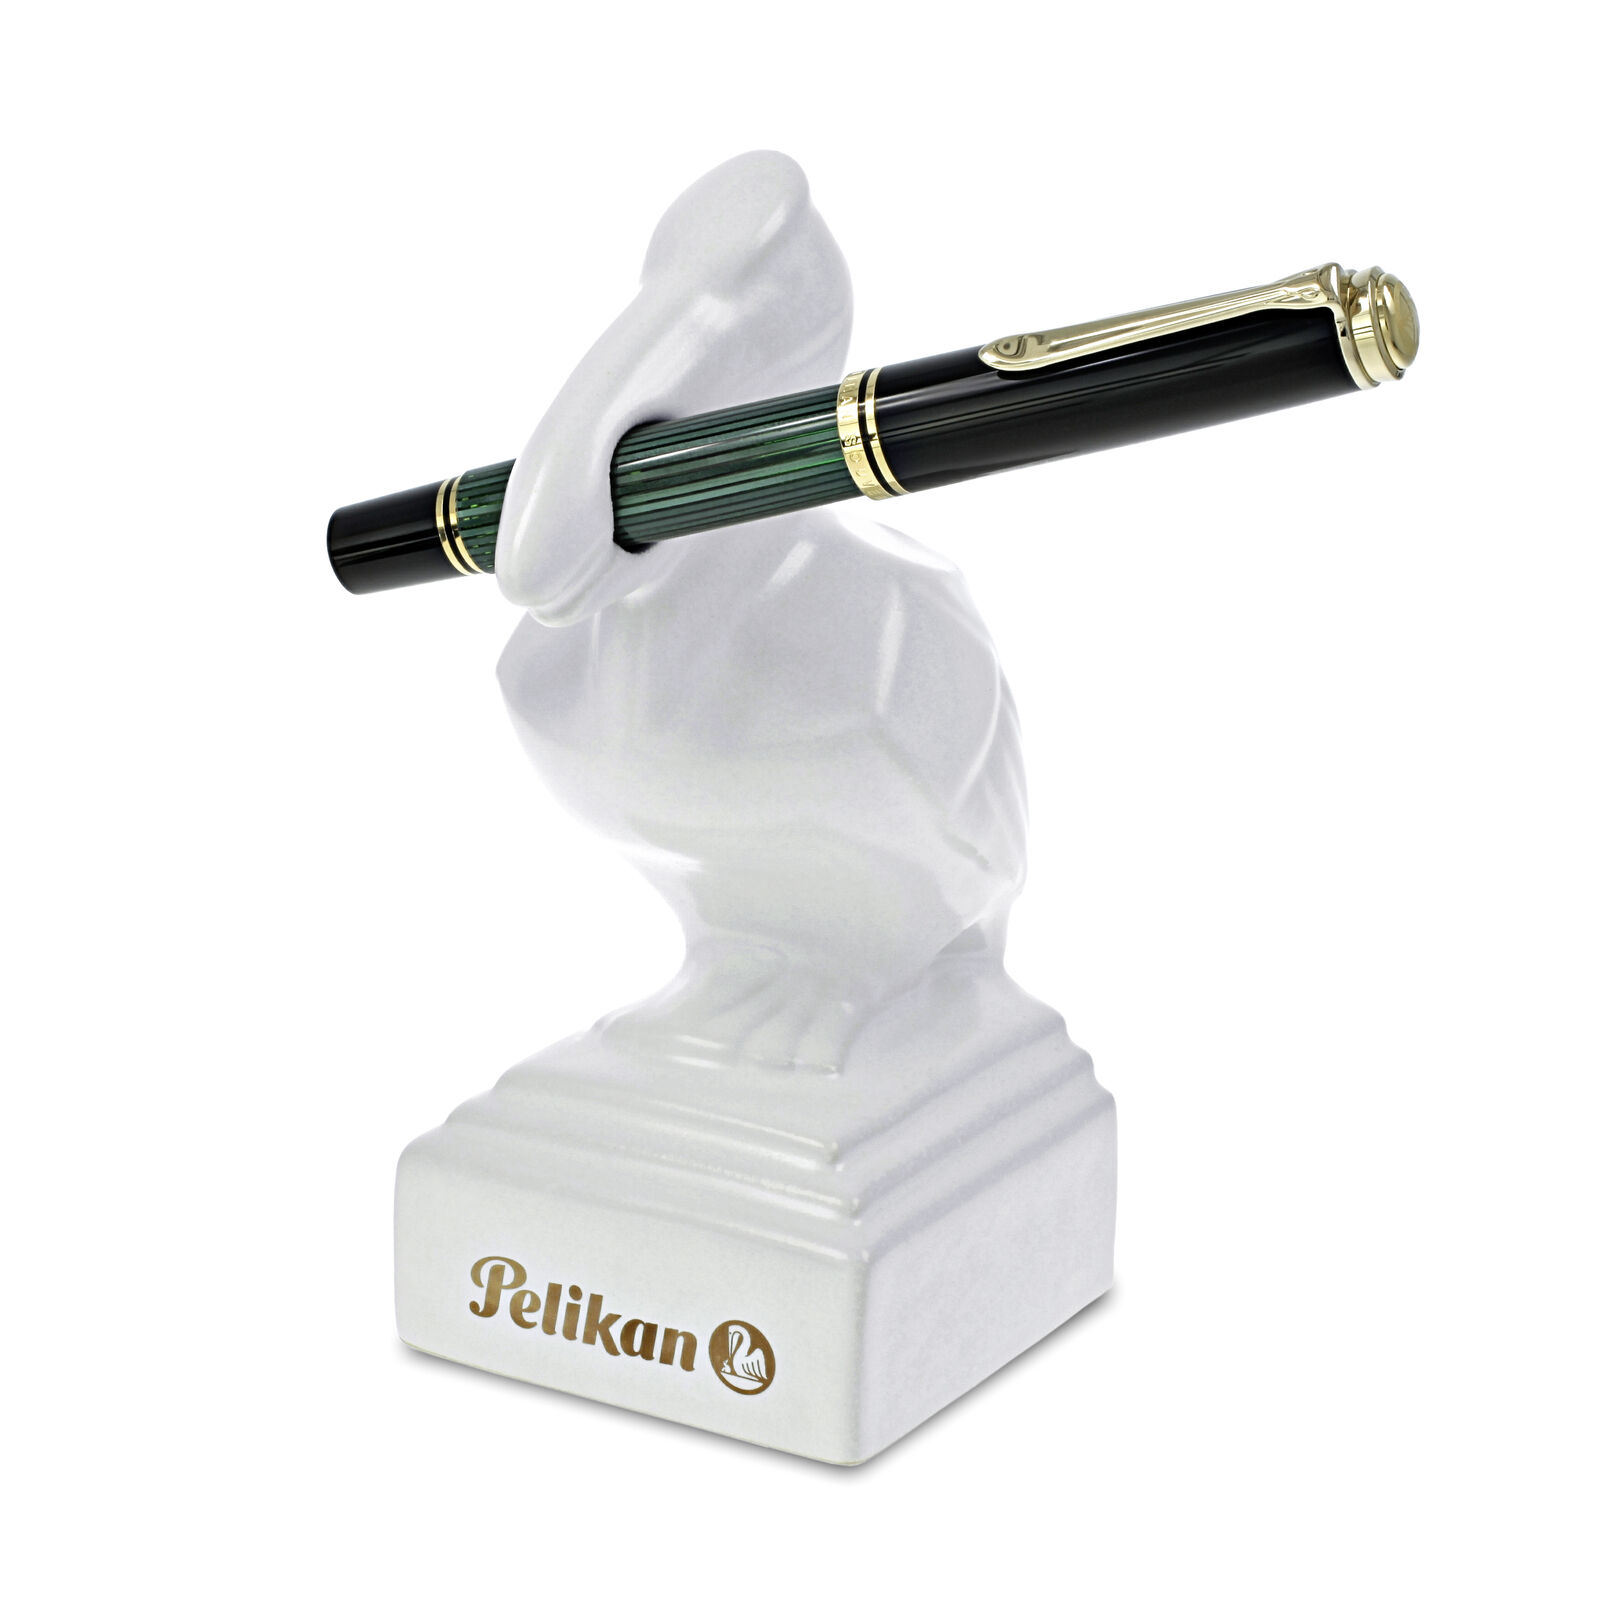 Pelikan Vintage White Pen Stand - Large - 043596 NEW in box (pen not included)